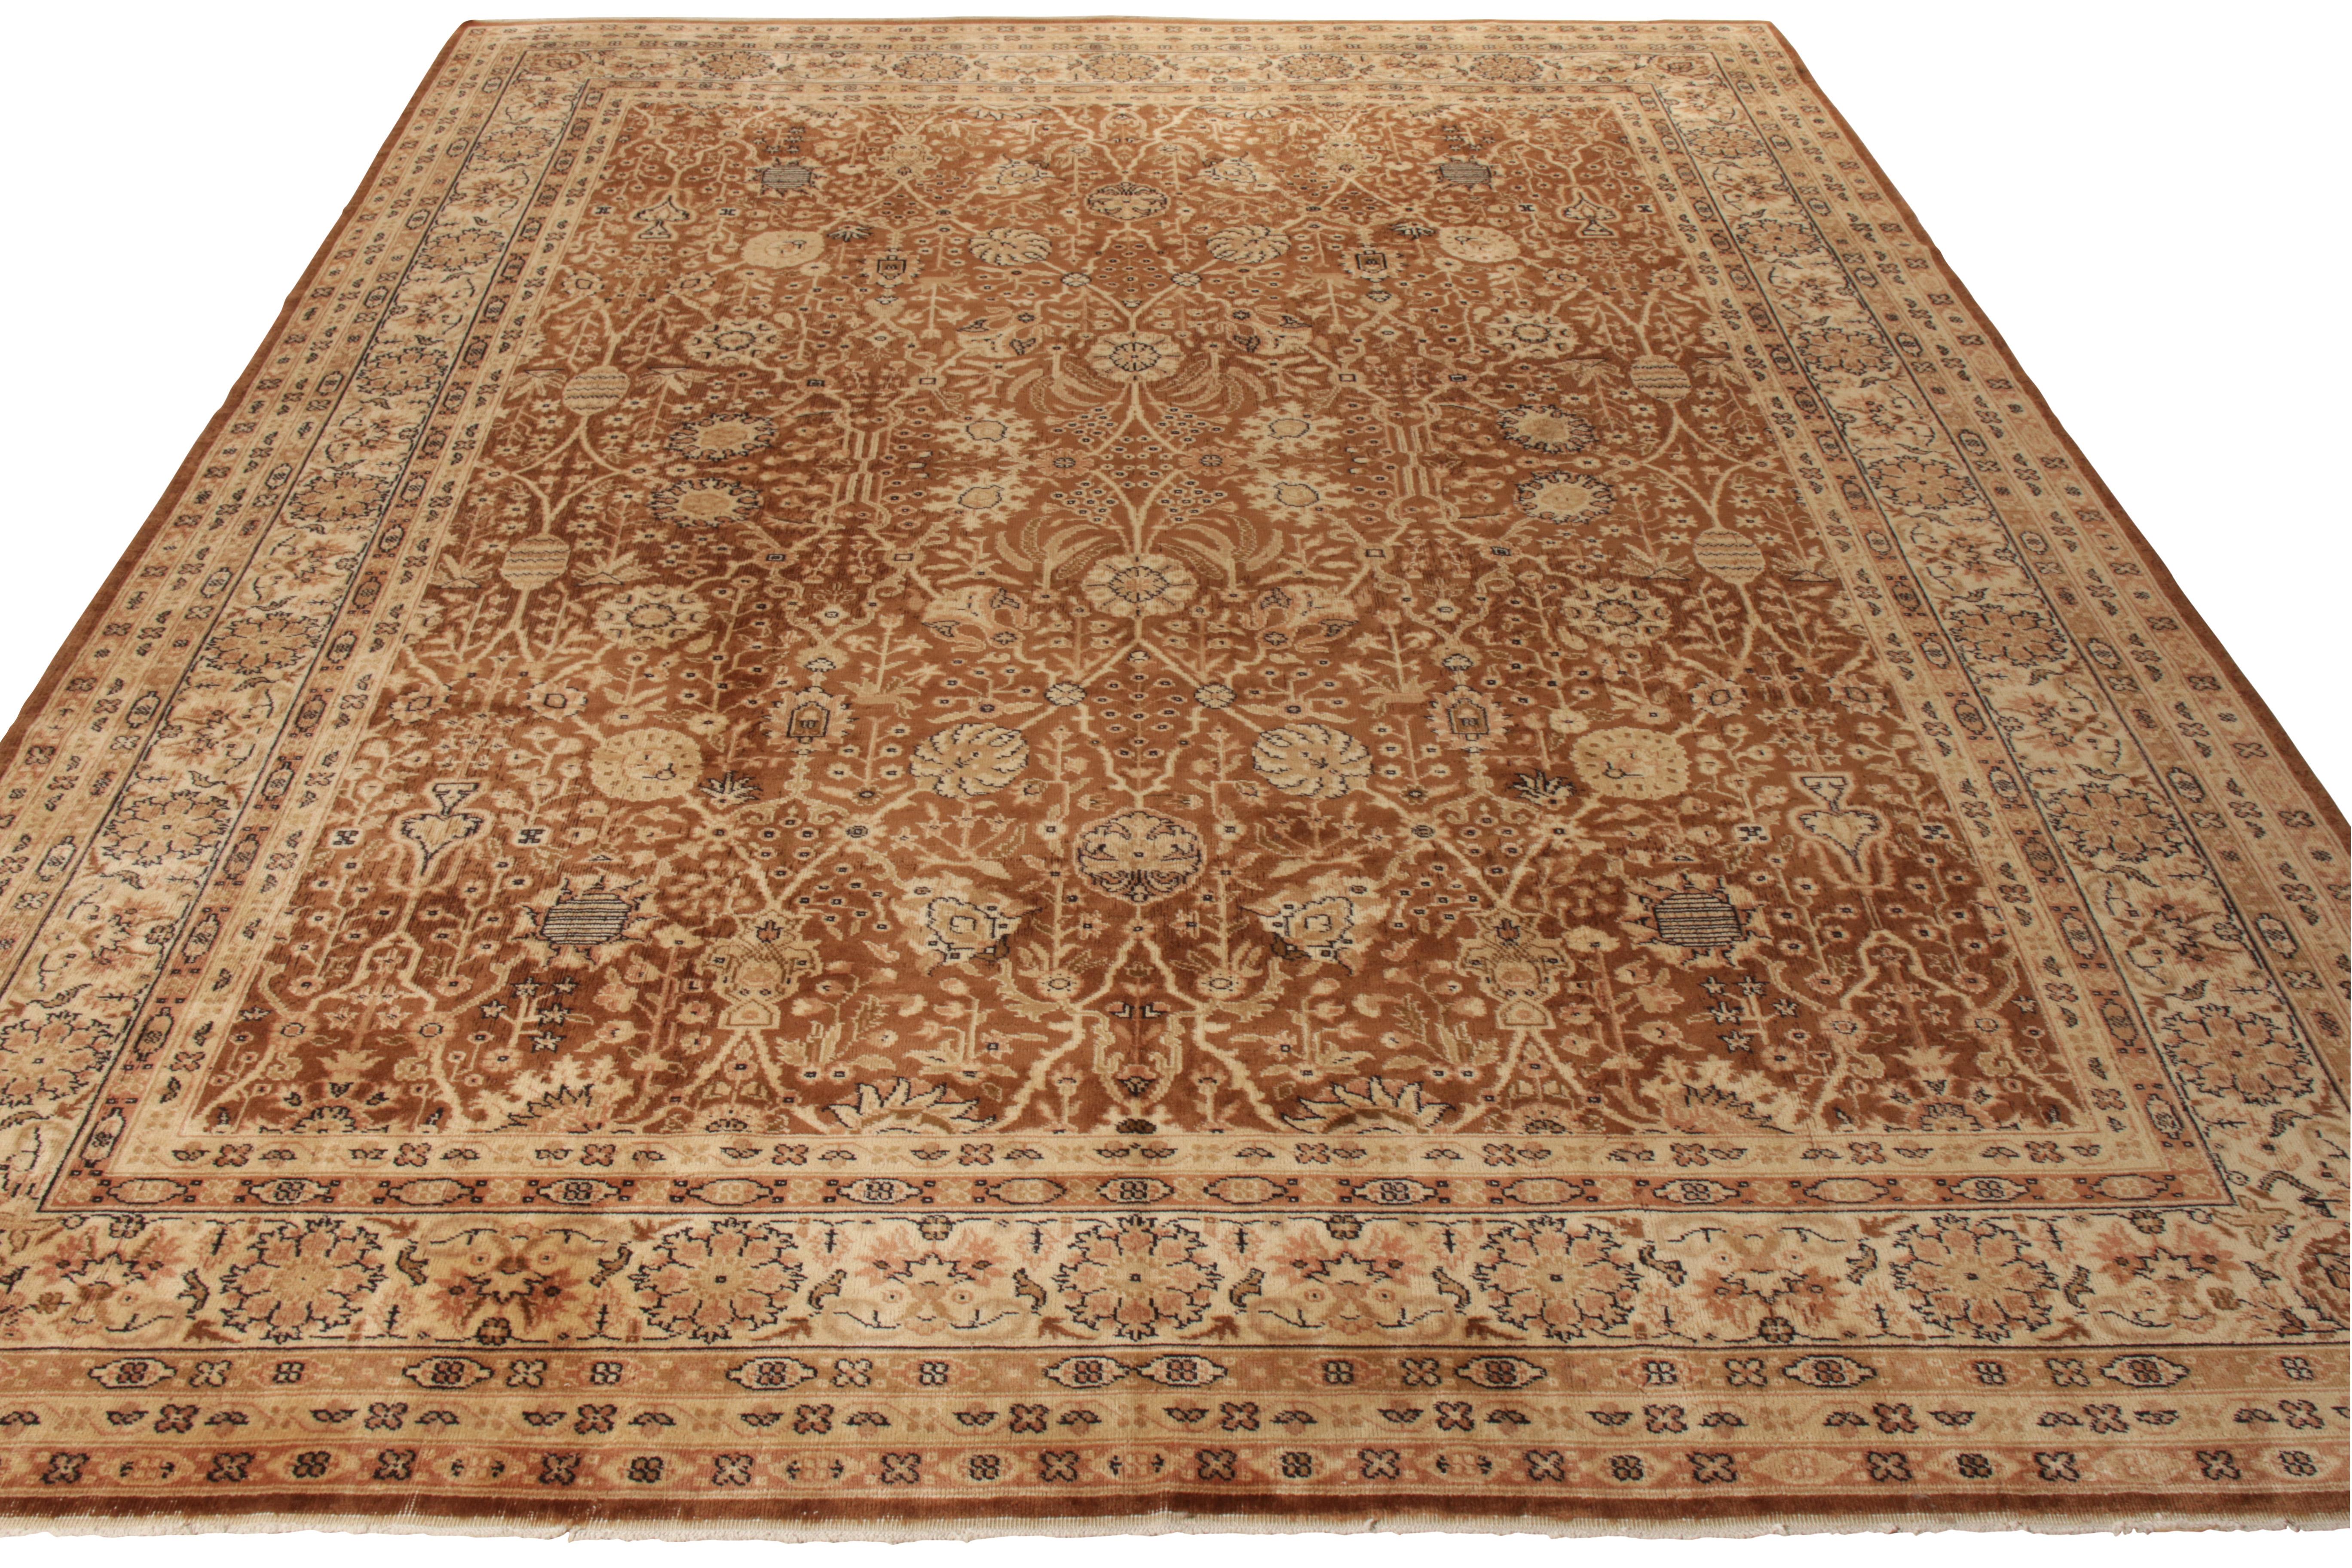 Hand knotted in wool, an exceptional antique 10x13 Samarkand rug originating from East Turkestan circa 1920-1930. Present in a luxurious colorway of brown, beige and golden tones, the rug exhibits fine craftsmanship with a dextrous floral pattern